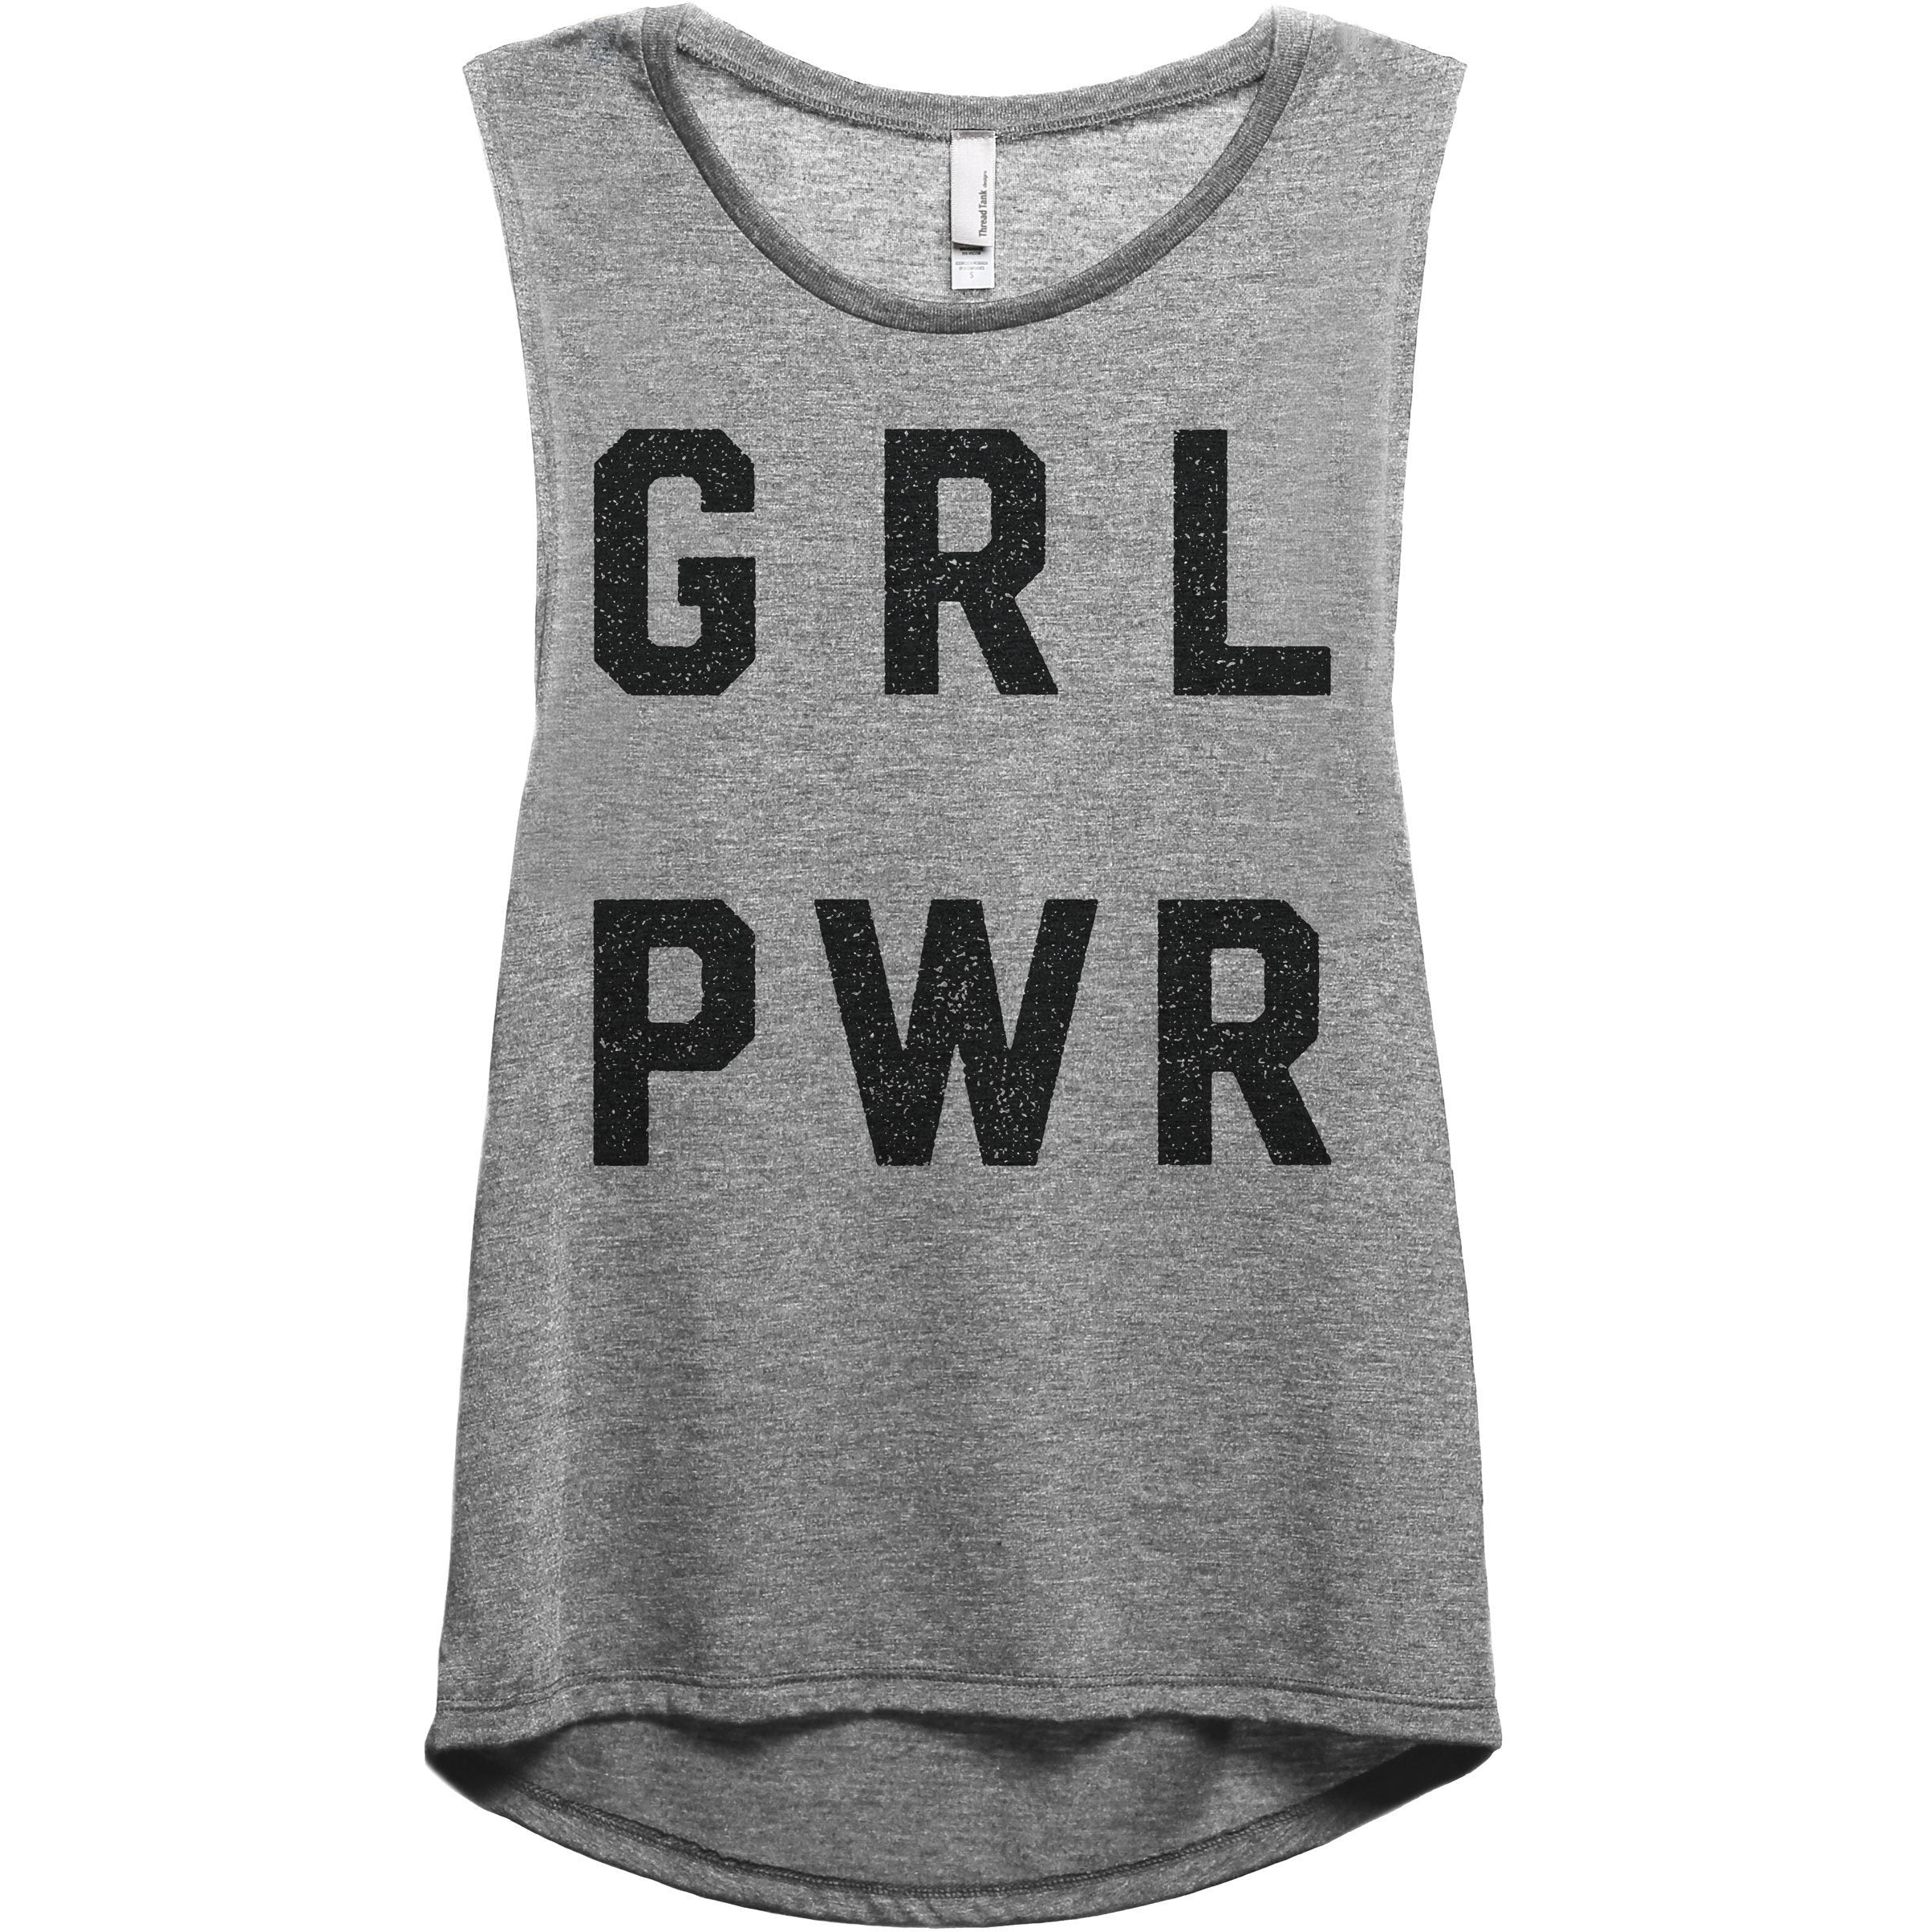 GRL PWR Girl Power Women's Graphic Printed Sleeveless Muscle Tank Top ...